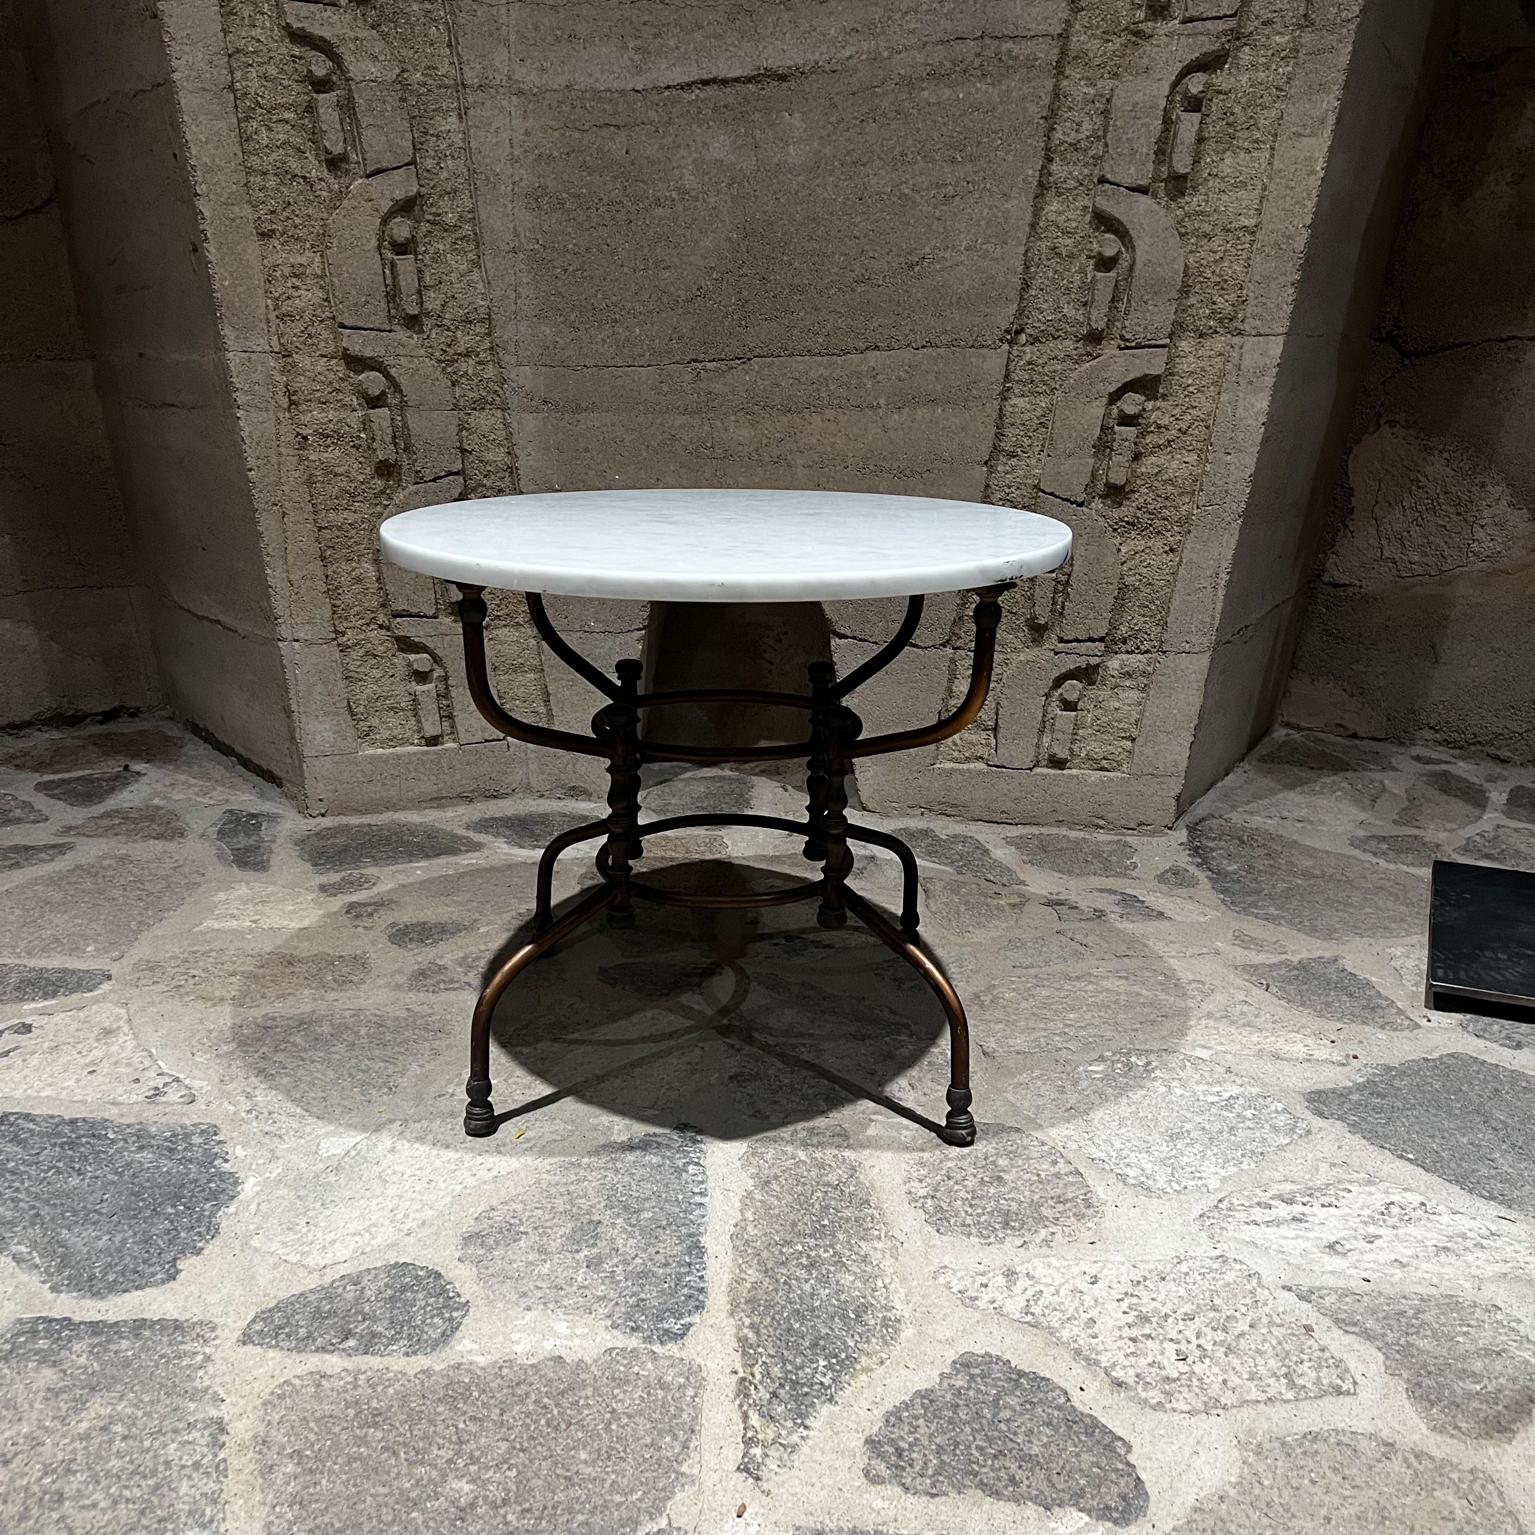 Antique Italian marble garden side table
Ornate bronze base
measures: 20 tall x 24.25 diameter
Stamped Made in Italy
Preowned original vintage condition
See images provided.
Delivery to LA OC Palm Springs.